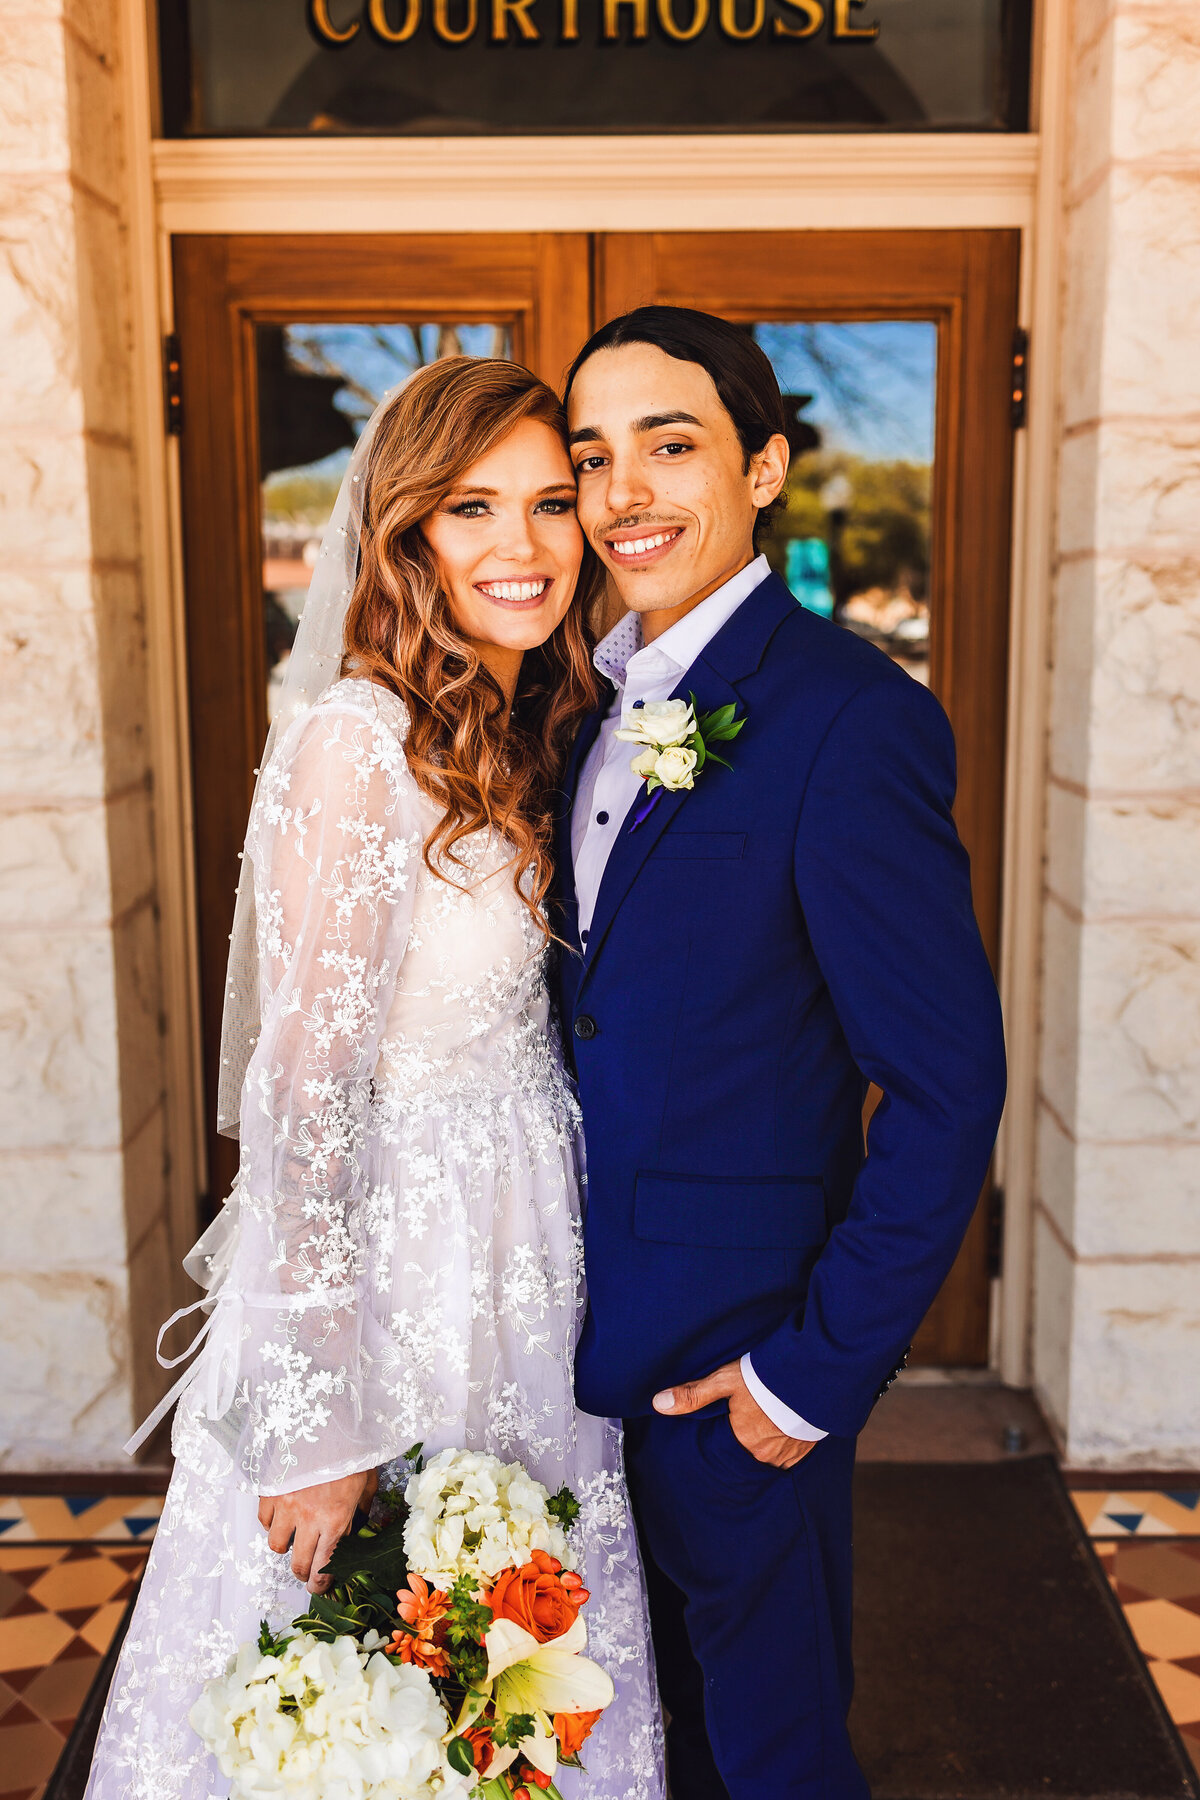 Experience the magic of an intimate courthouse elopement in downtown New Braunfels, Texas. Dive into vibrant colors and create your own adventure, because love knows no bounds.